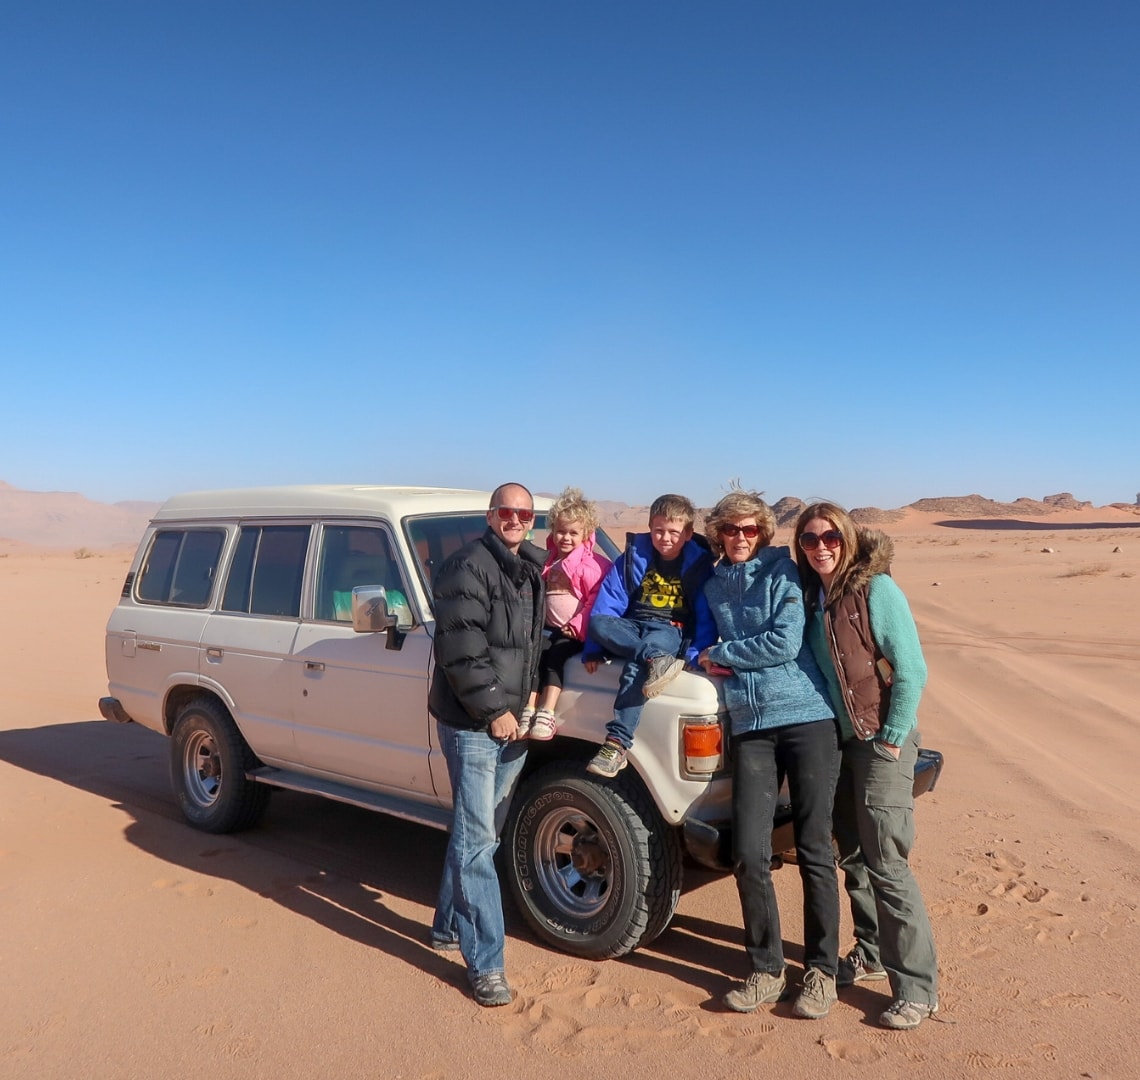 How to have an epic family holiday - Wanderlust family with Granny Wanderlust by our Land Cruiser in Wadi Rum Jordan